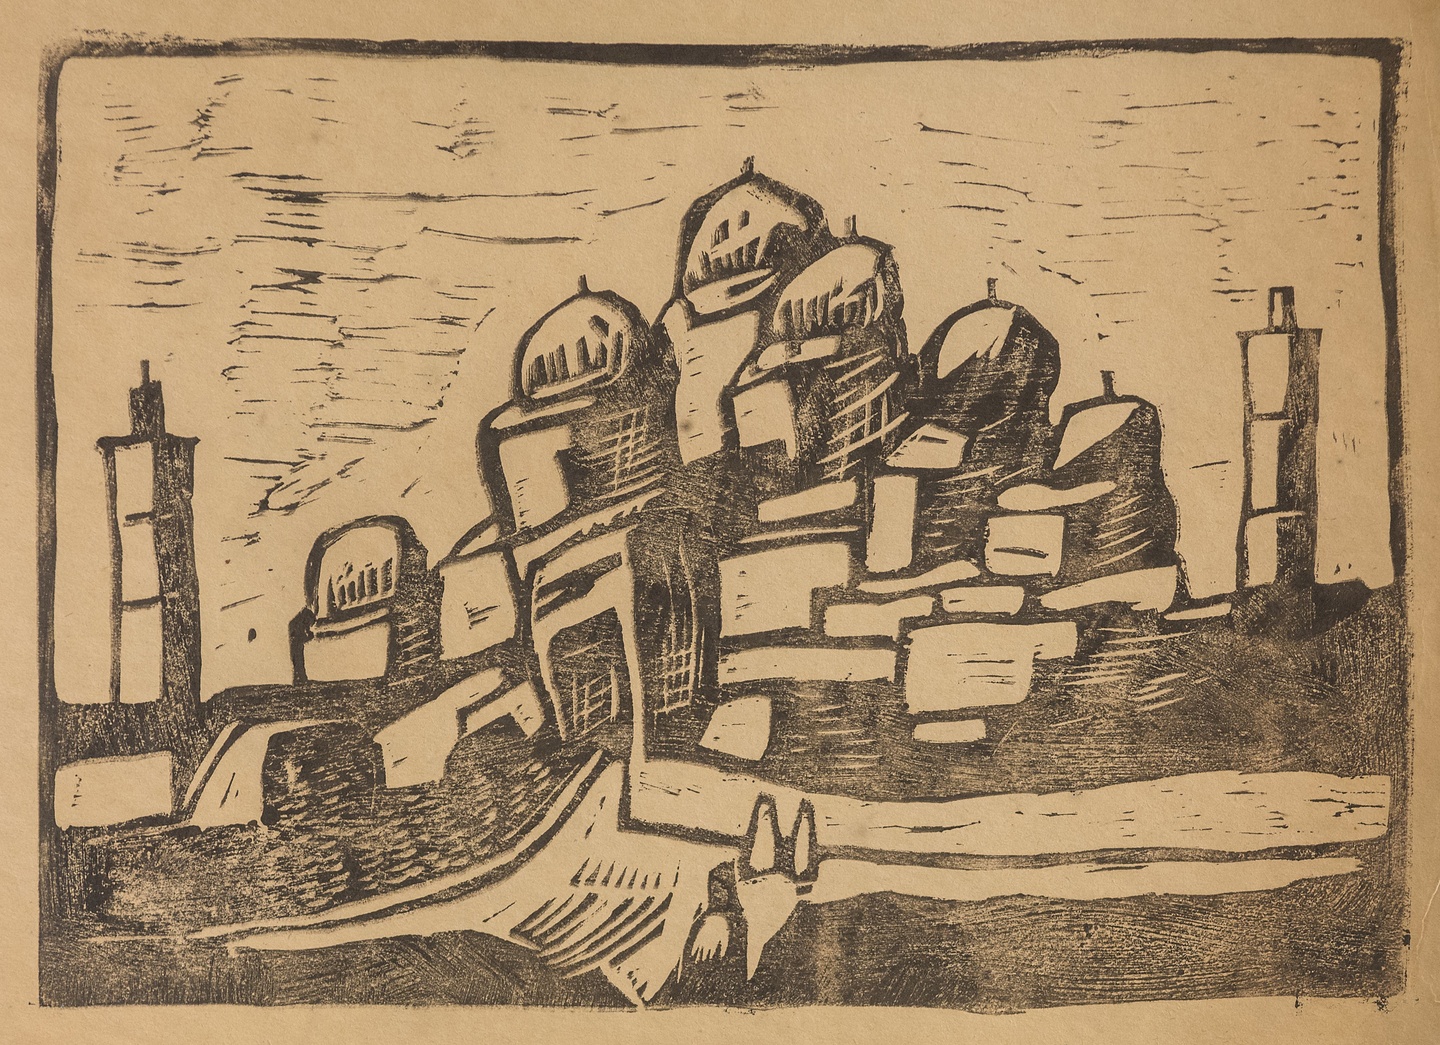 A black-ink woodcut print of buildings with onion-domes and towers on a hill